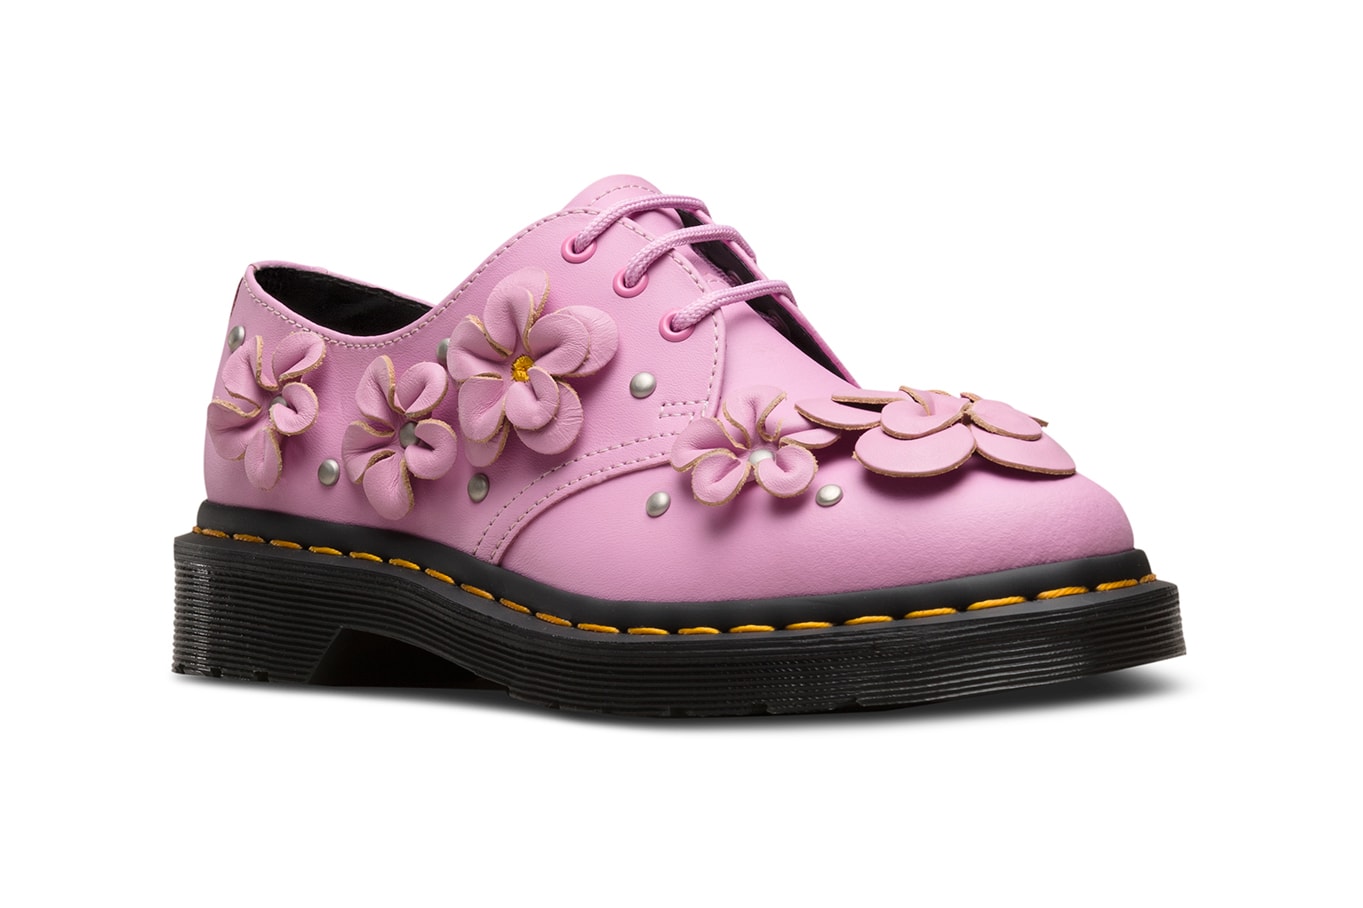 Dr martens doc black pink 3d flower boots shoes leather wanderlust spring 2018 floral where to buy